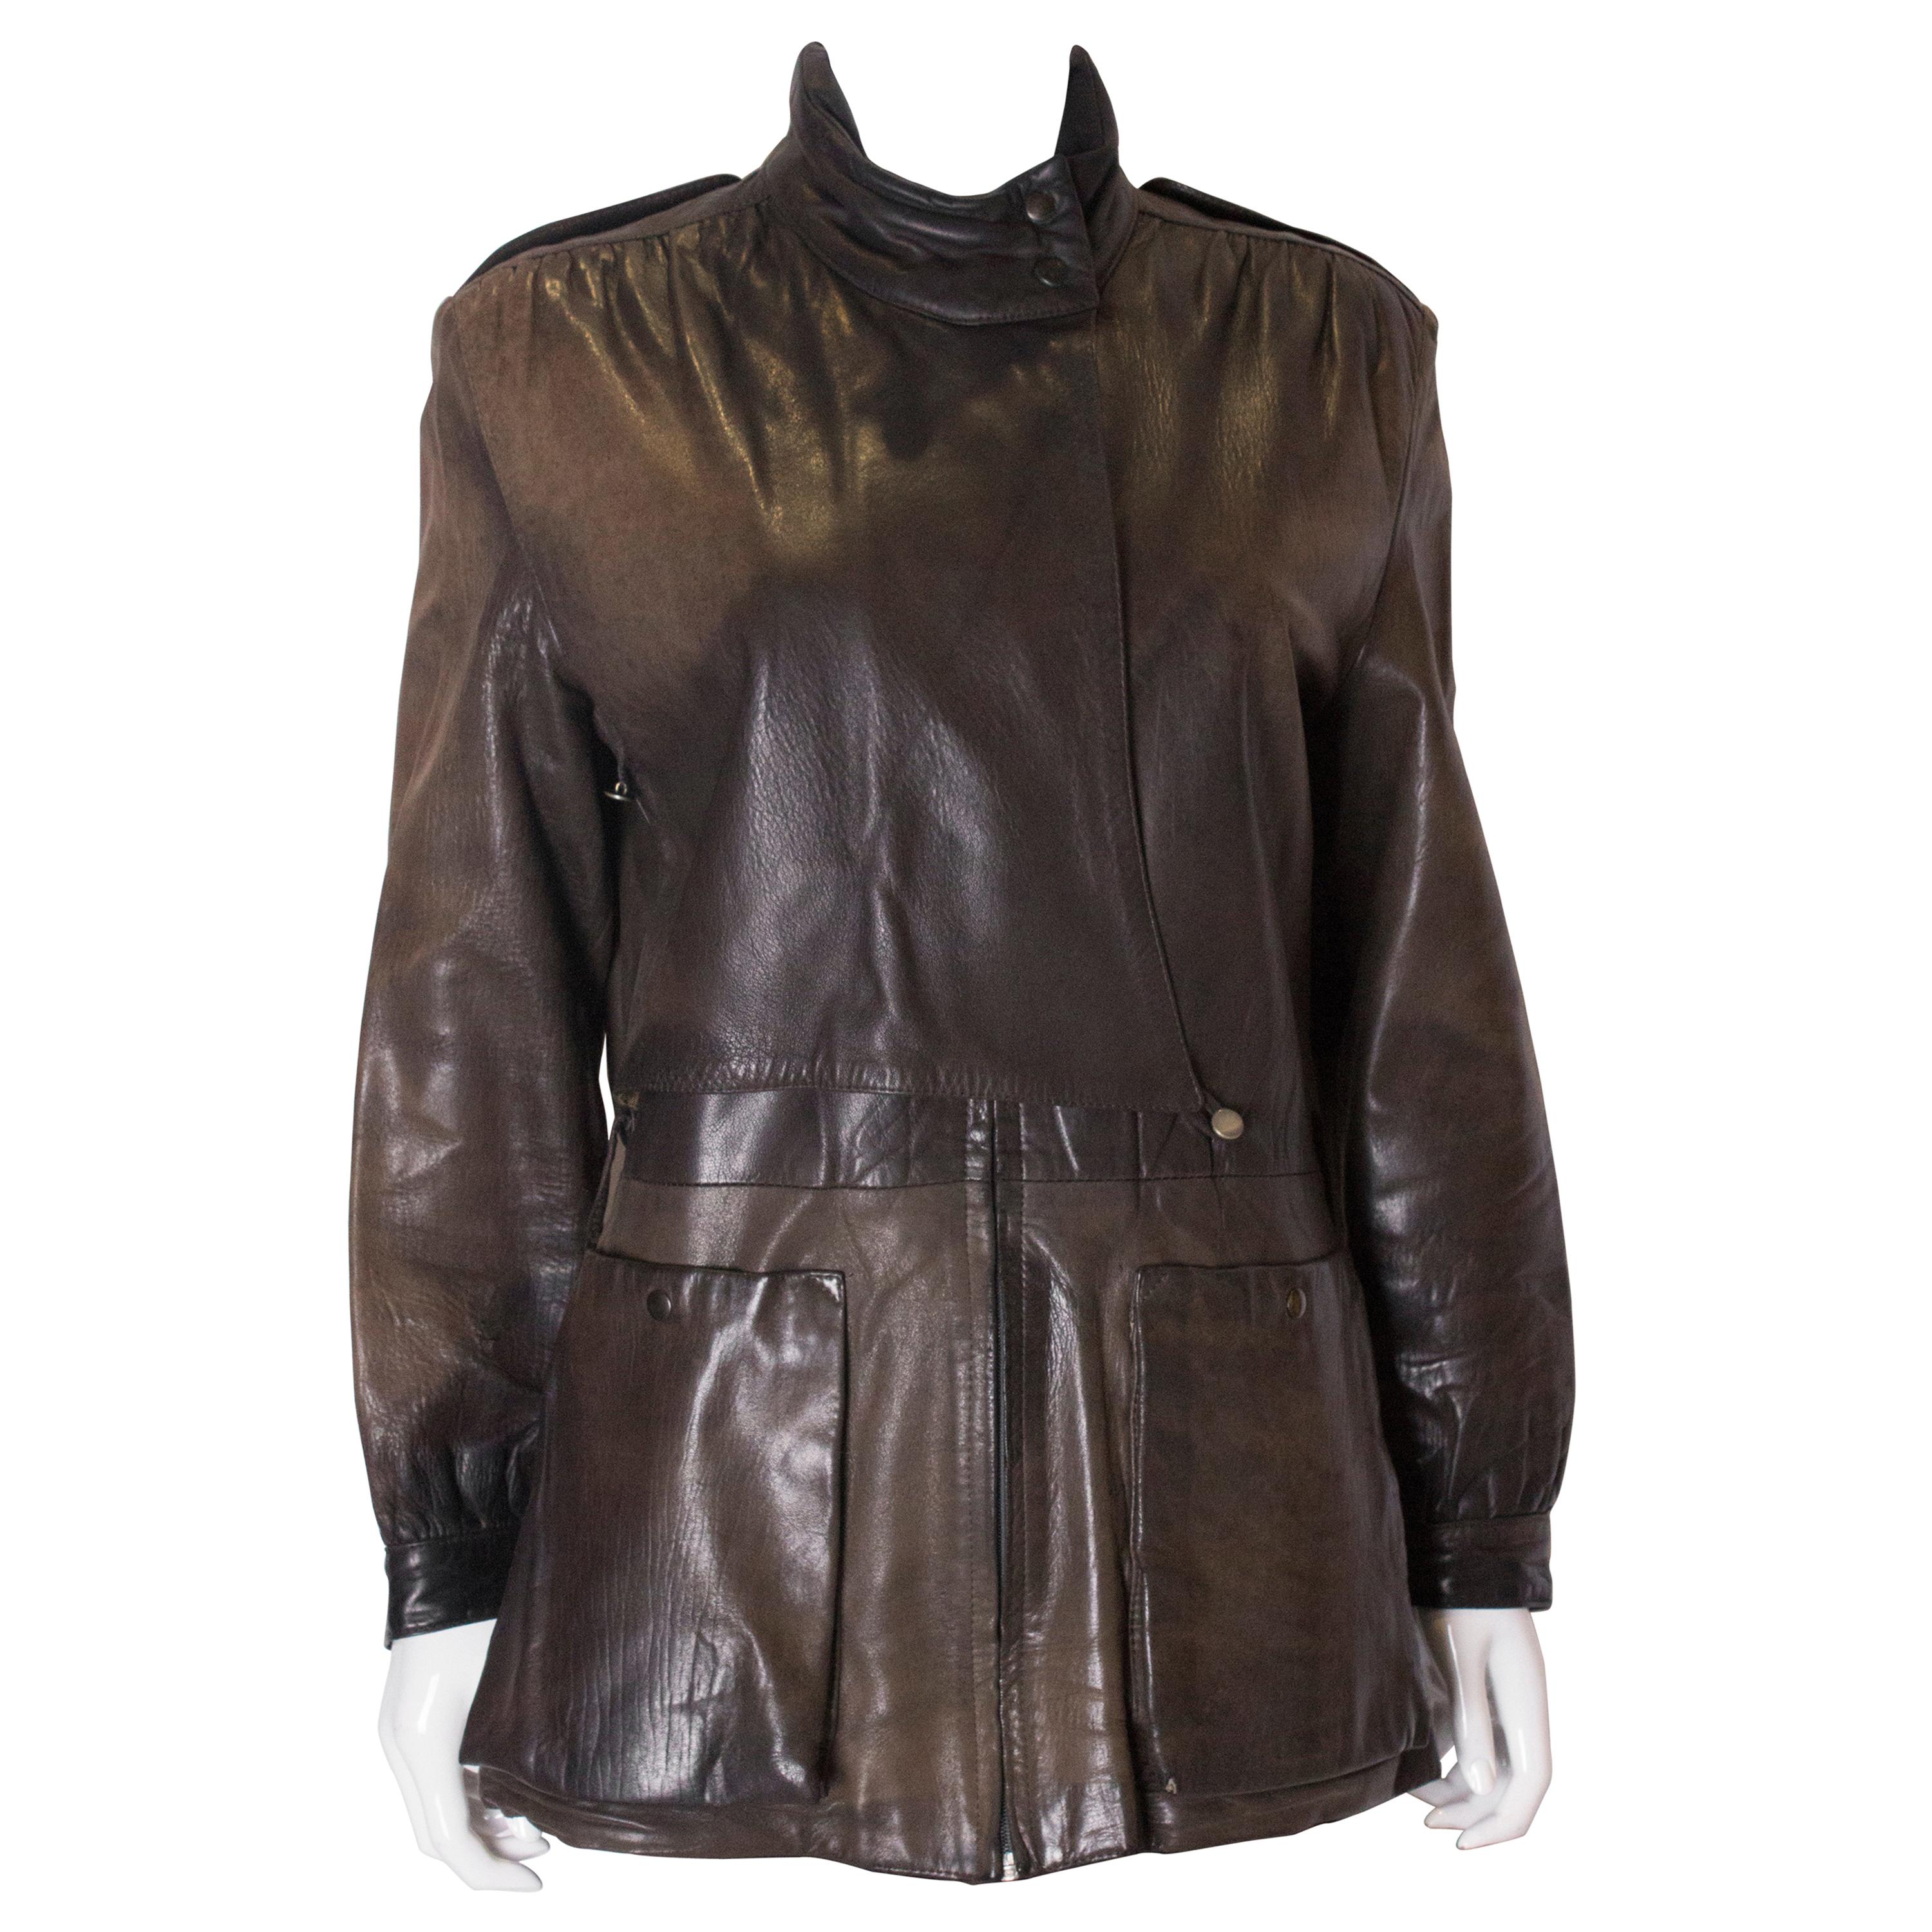 Vintage Leather Jacket with Great Detail